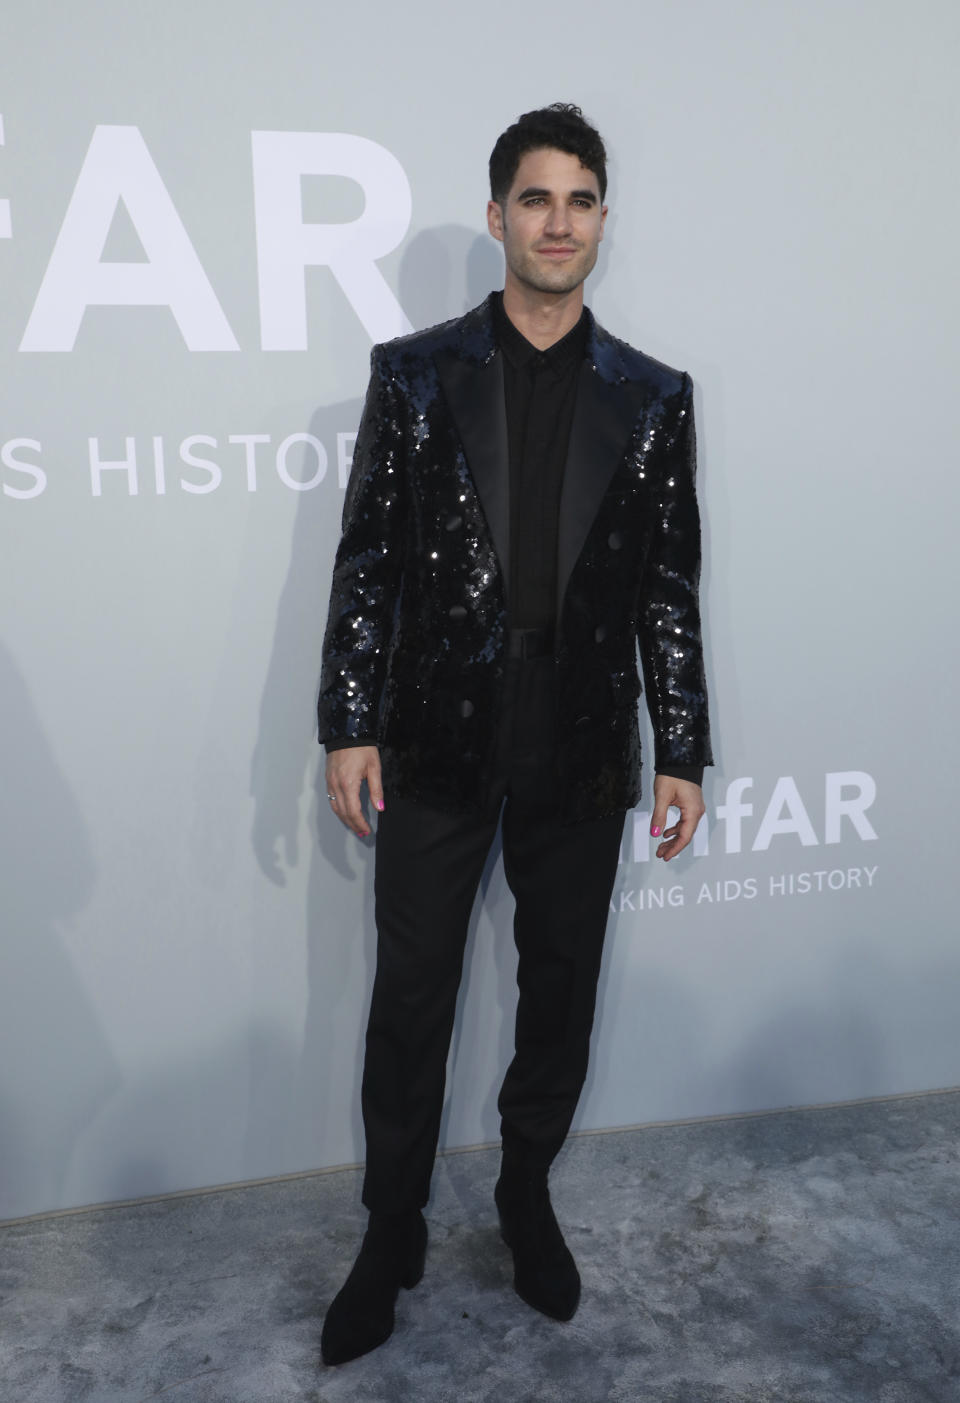 Darren Criss poses for photographers upon arrival at the amfAR Cinema Against AIDS benefit the during the 74th Cannes international film festival, Cap d'Antibes, southern France, Friday, July 16, 2021. (Photo by Vianney Le Caer/Invision/AP)